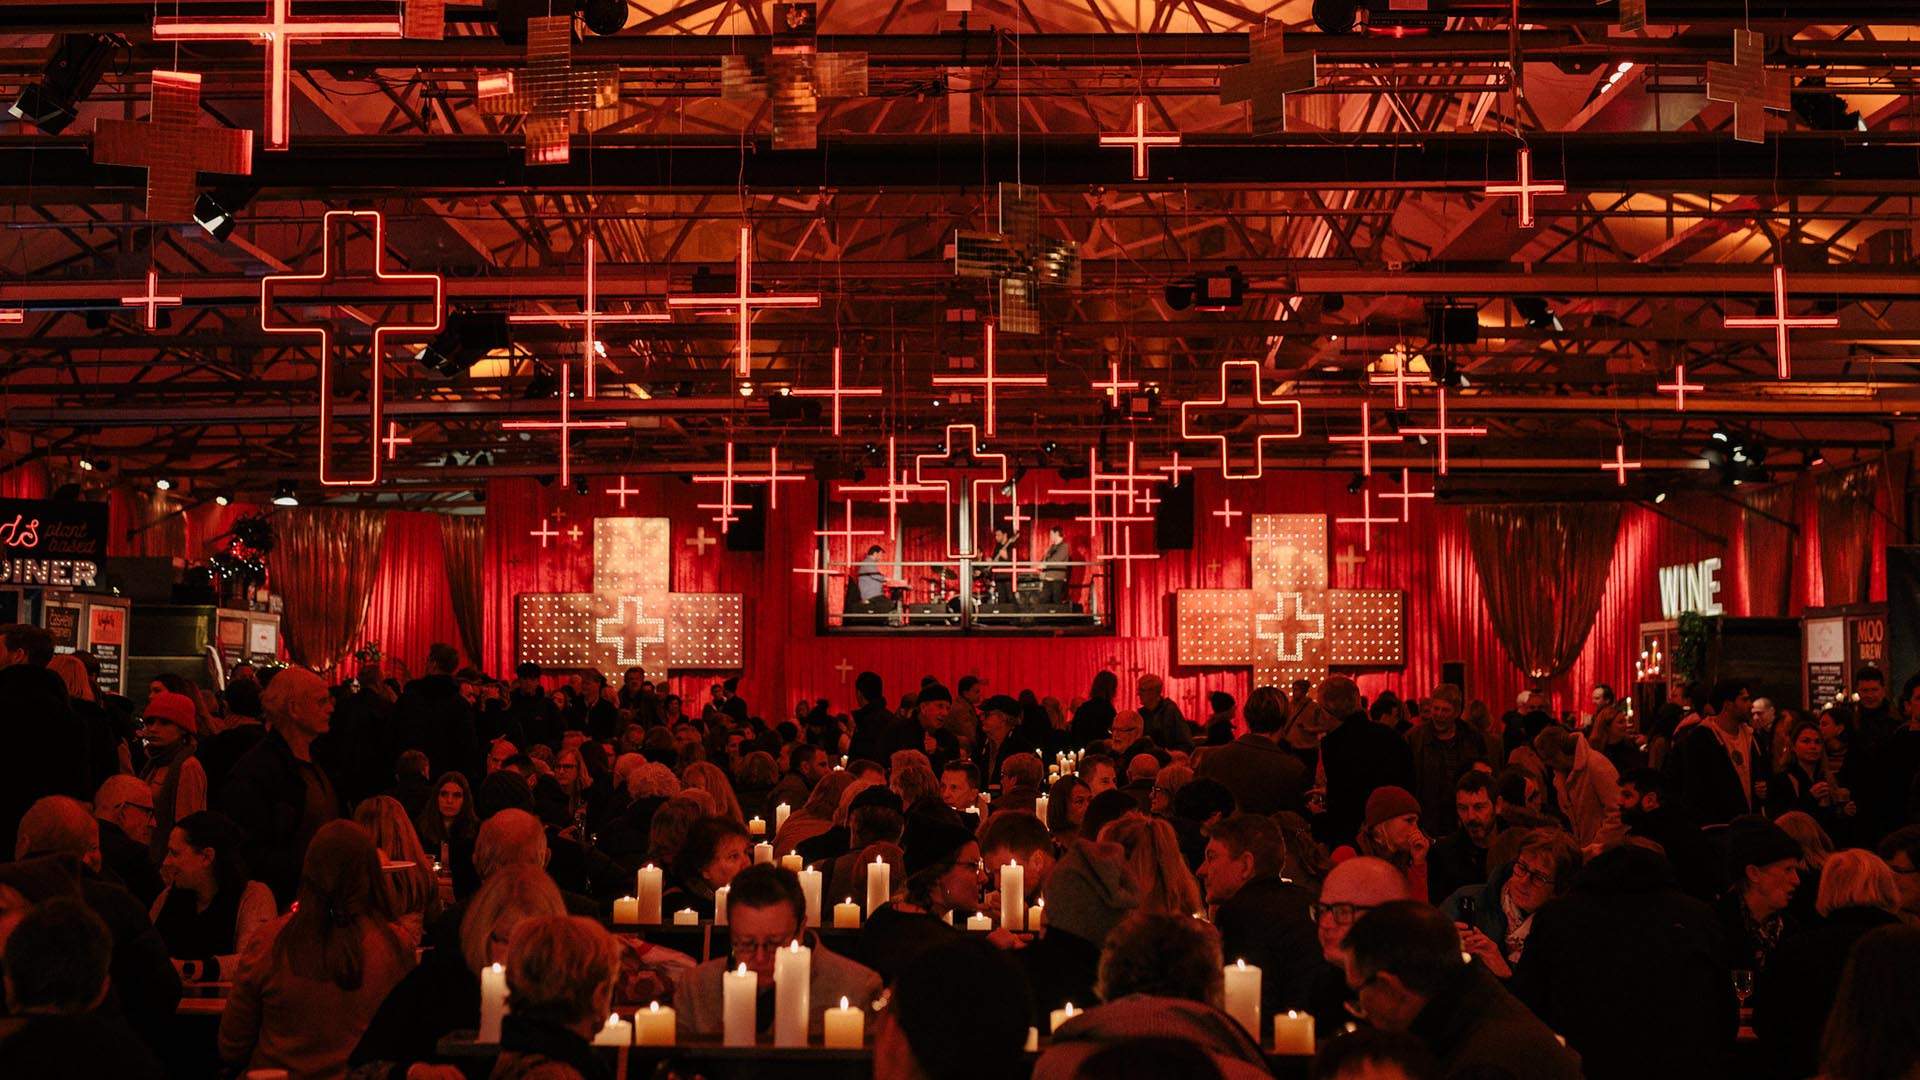 Dark Mofo Has Locked in Its 2023 Dates If You're Planning Ahead for Next Winter